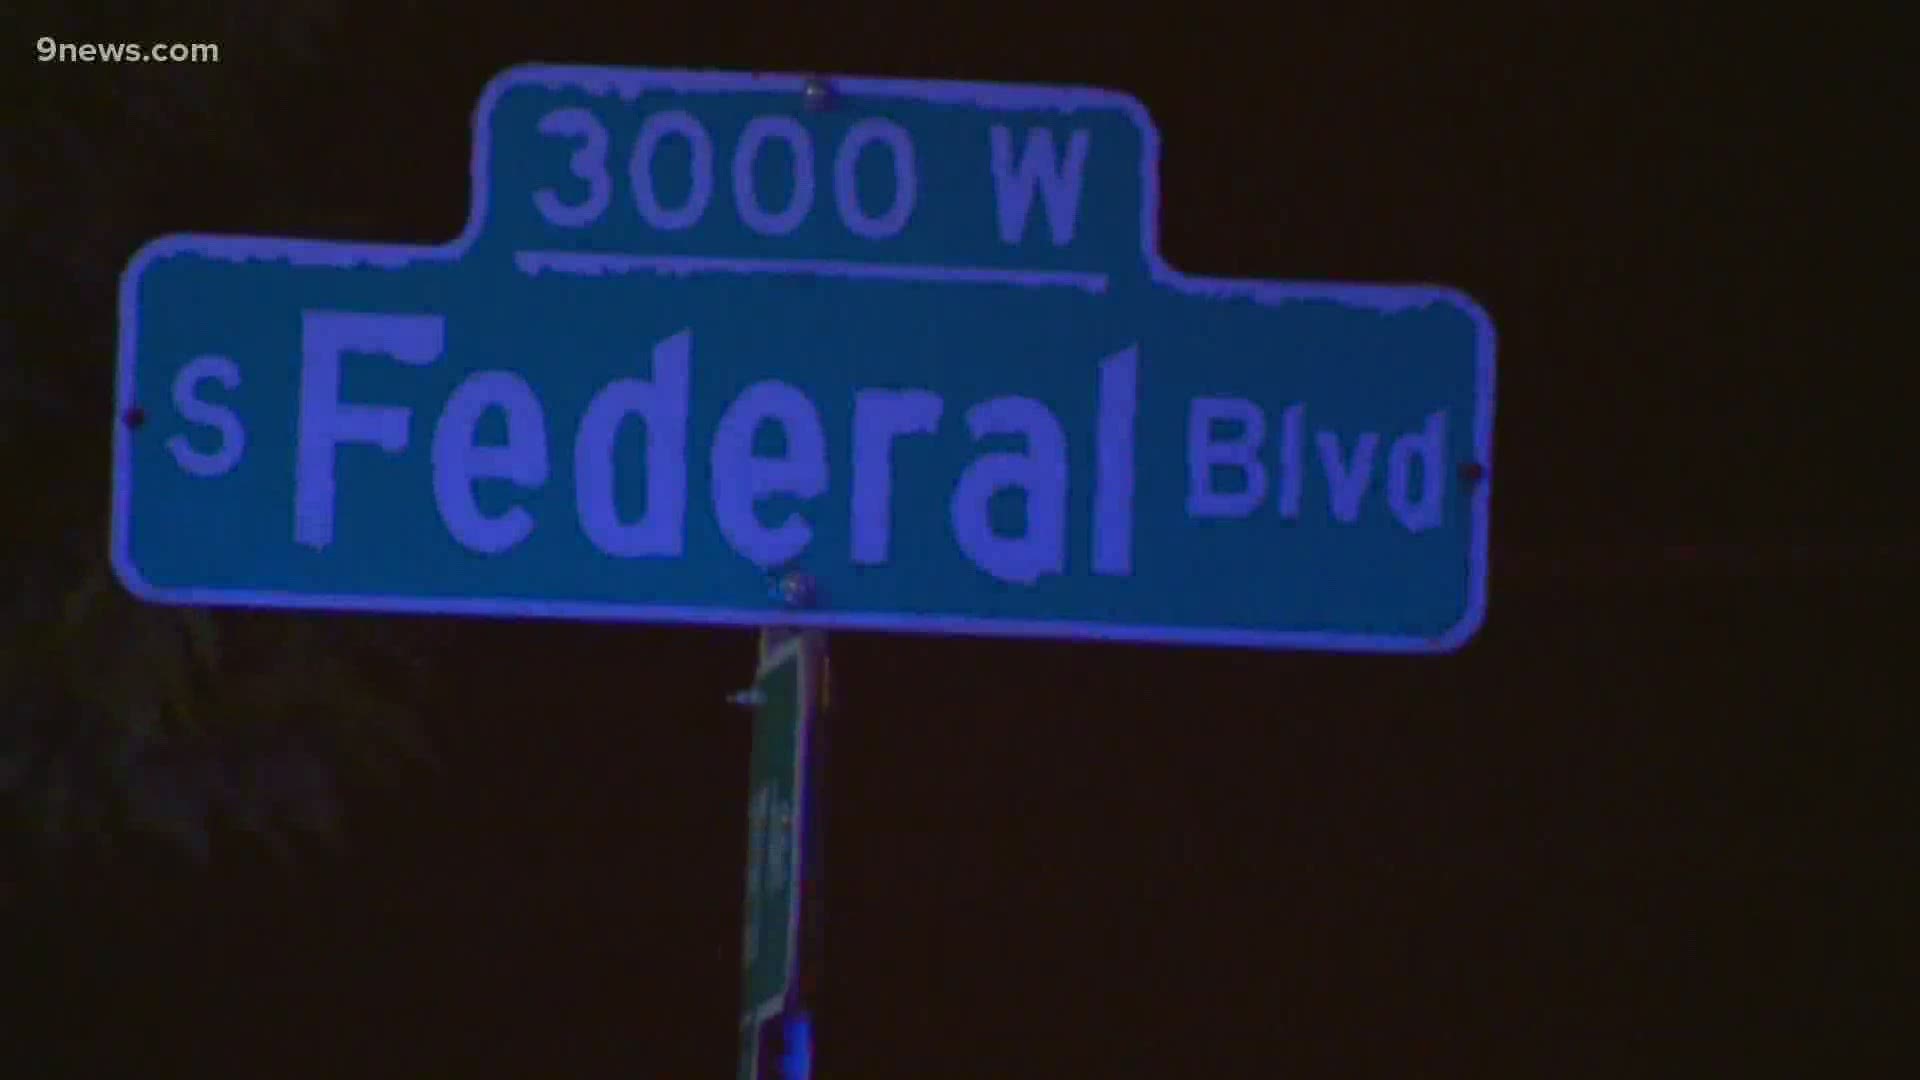 The Denver Police Department said there's a strategic reason behind the Sunday evening closures along Federal Boulevard.